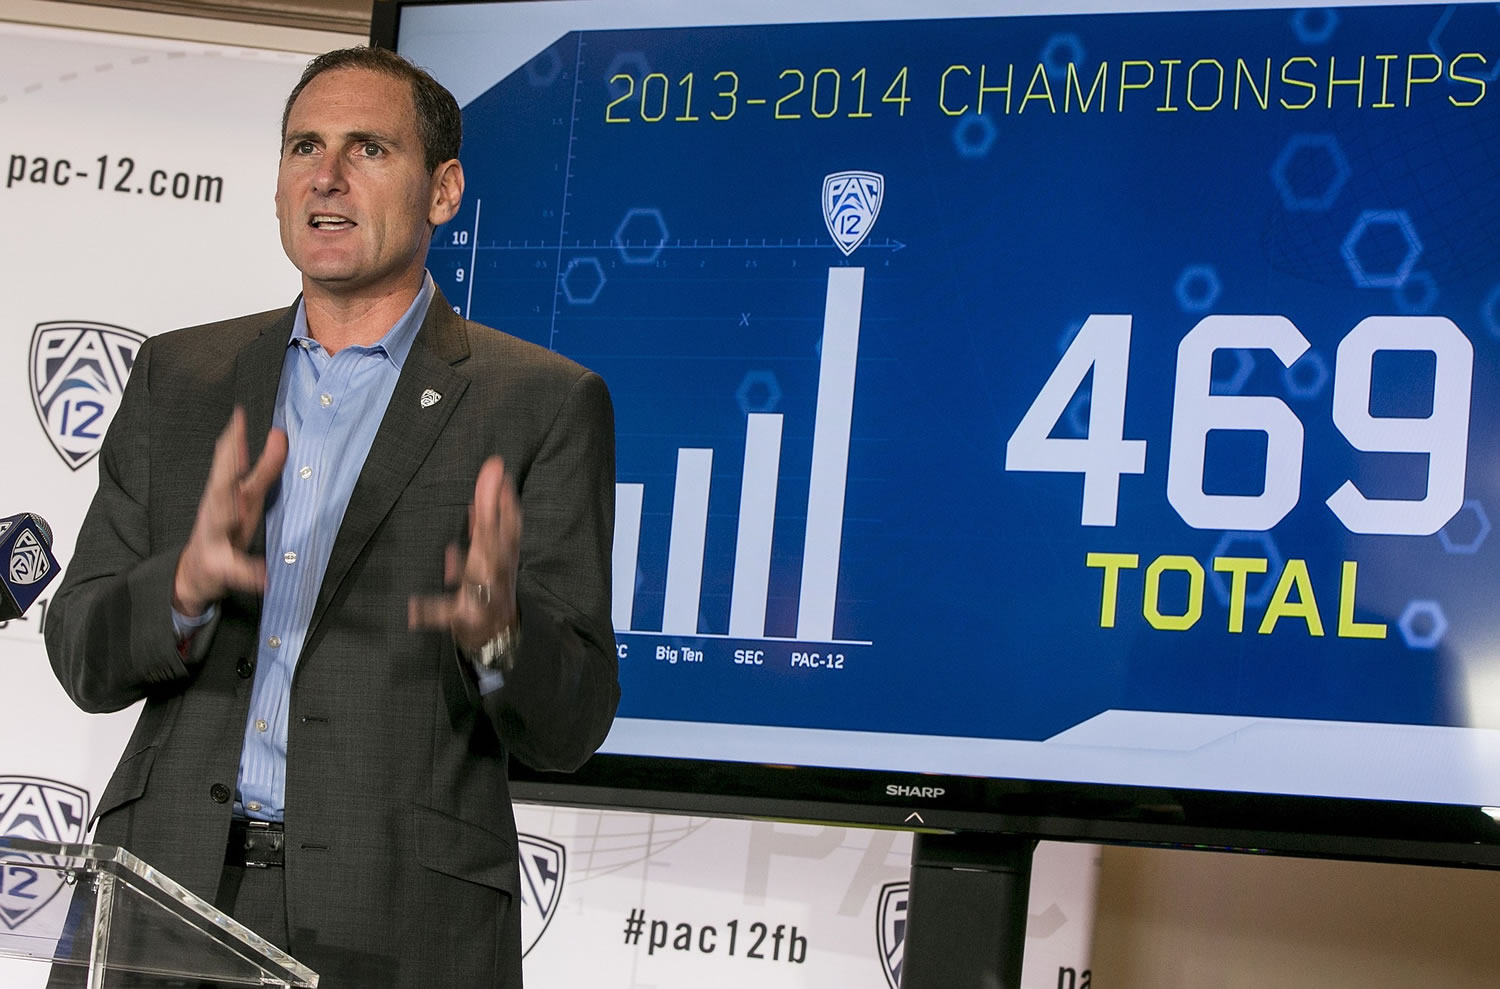 Pac-12 Commissioner Larry Scott delivers the opening remarks of the 2014 Pac-12 college football media days at Paramount Studios in Los Angeles on Wednesday.